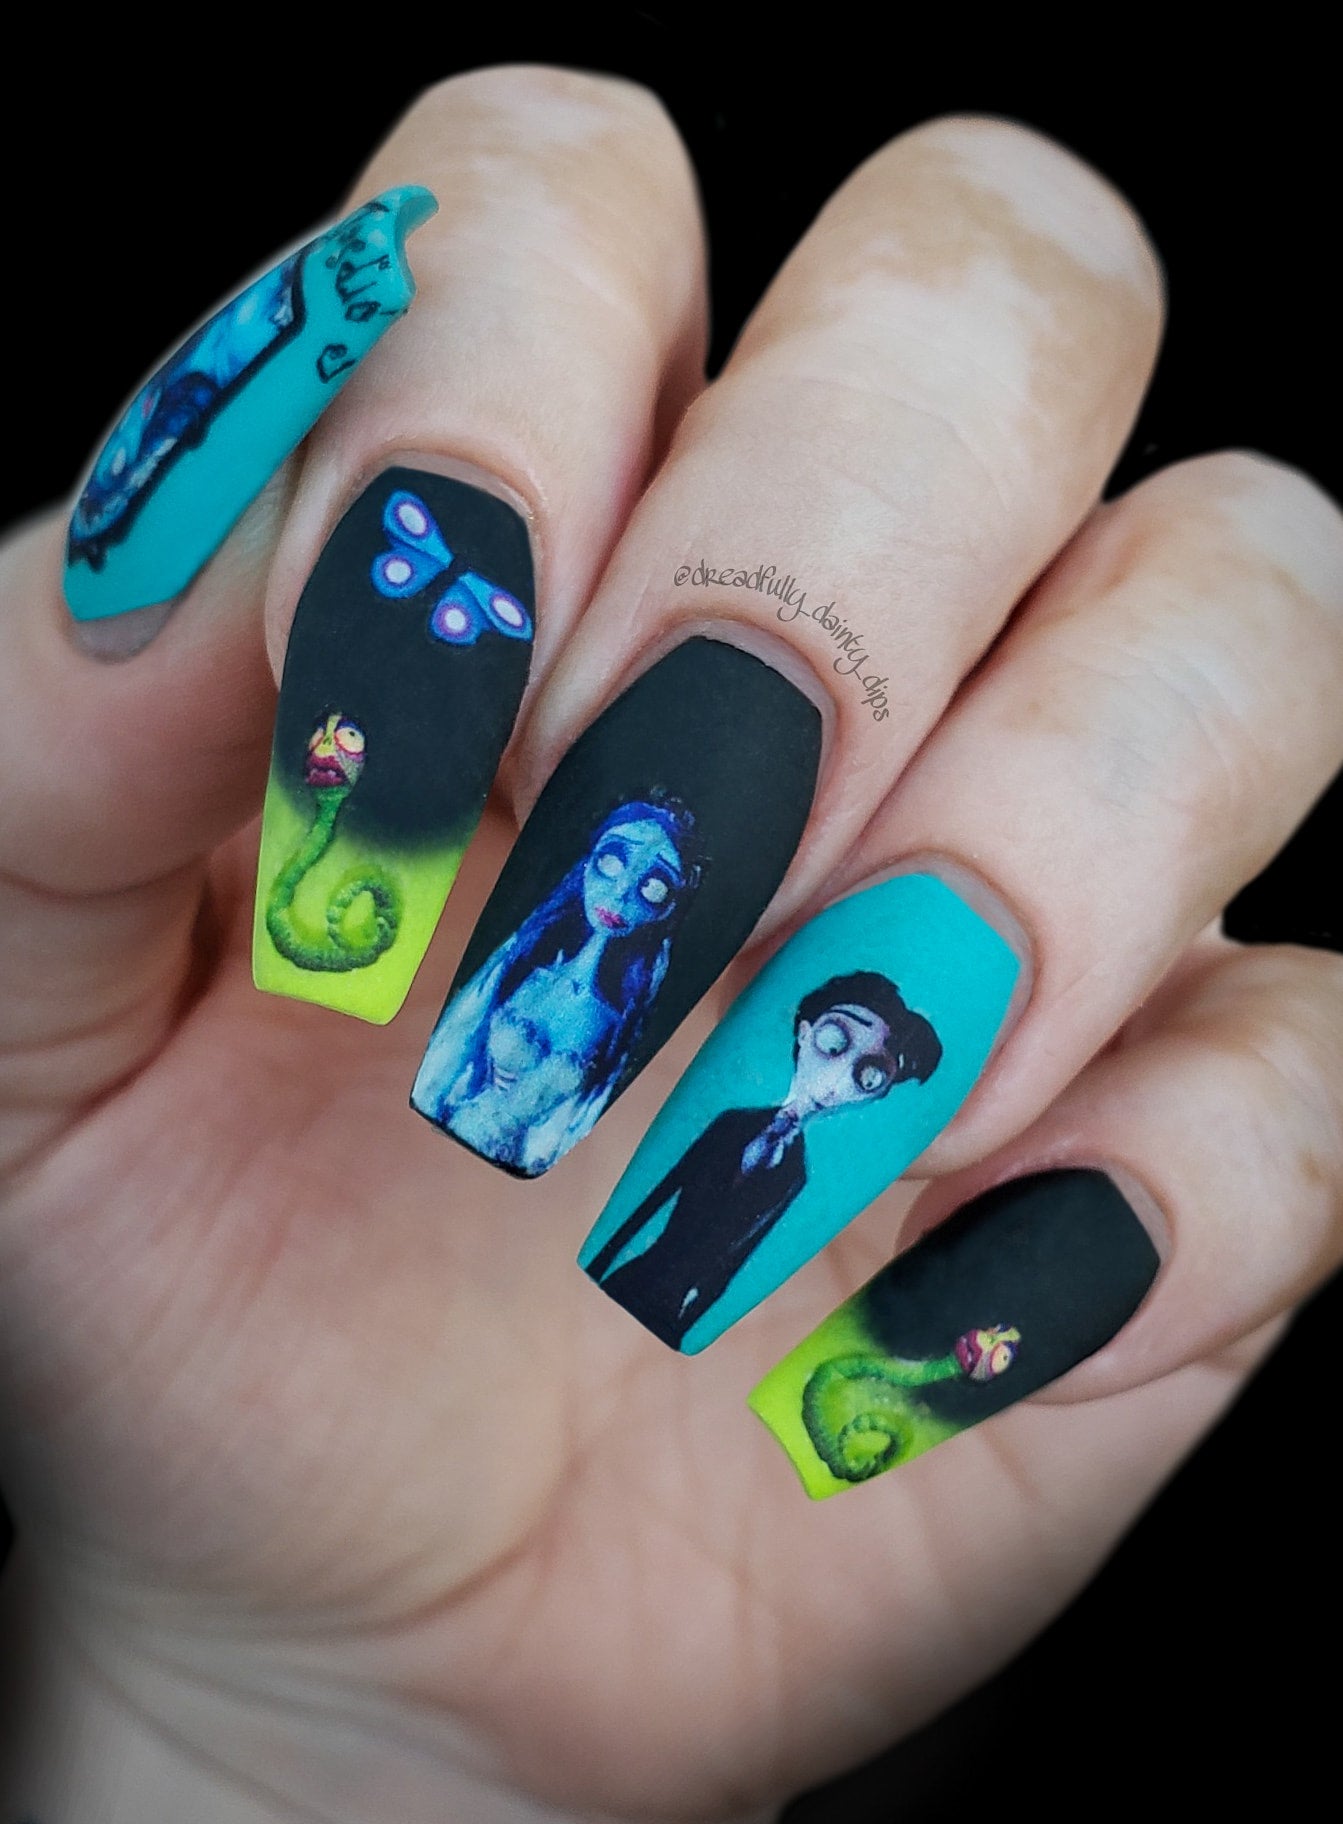 Corpse Bride Nail Art Decals